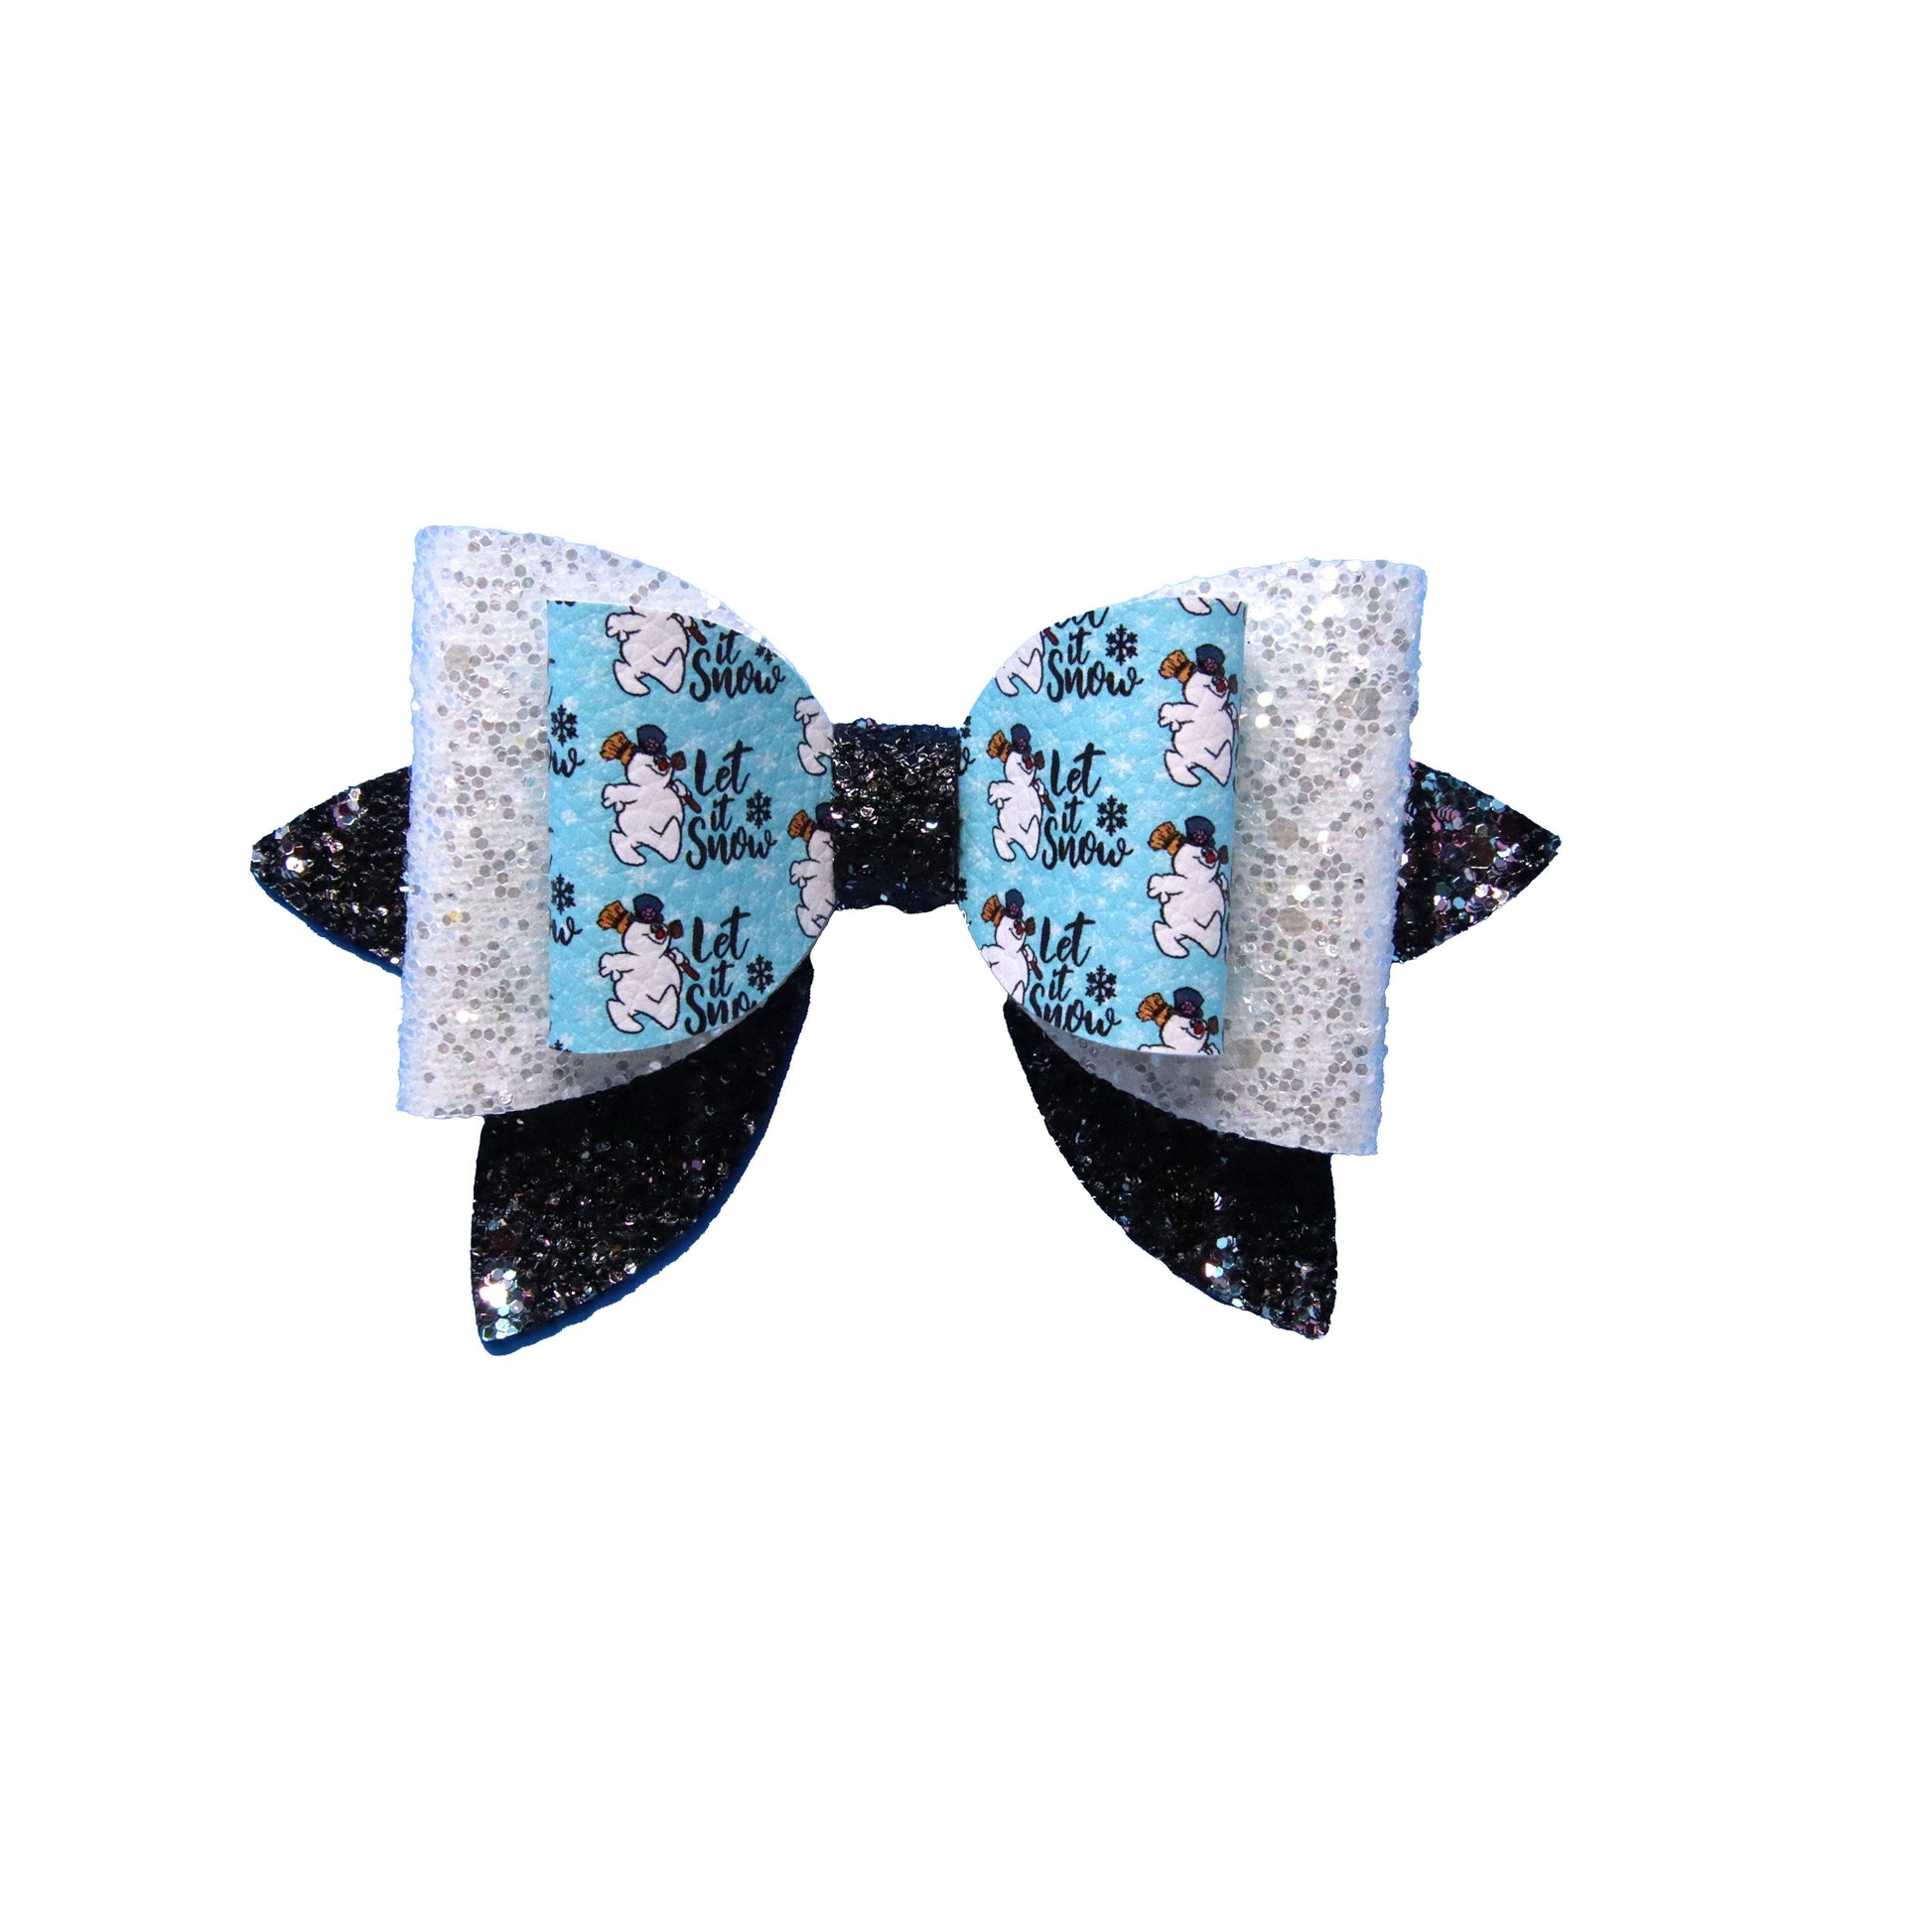 4.5 inch Let It Snow Double Harlow Bow